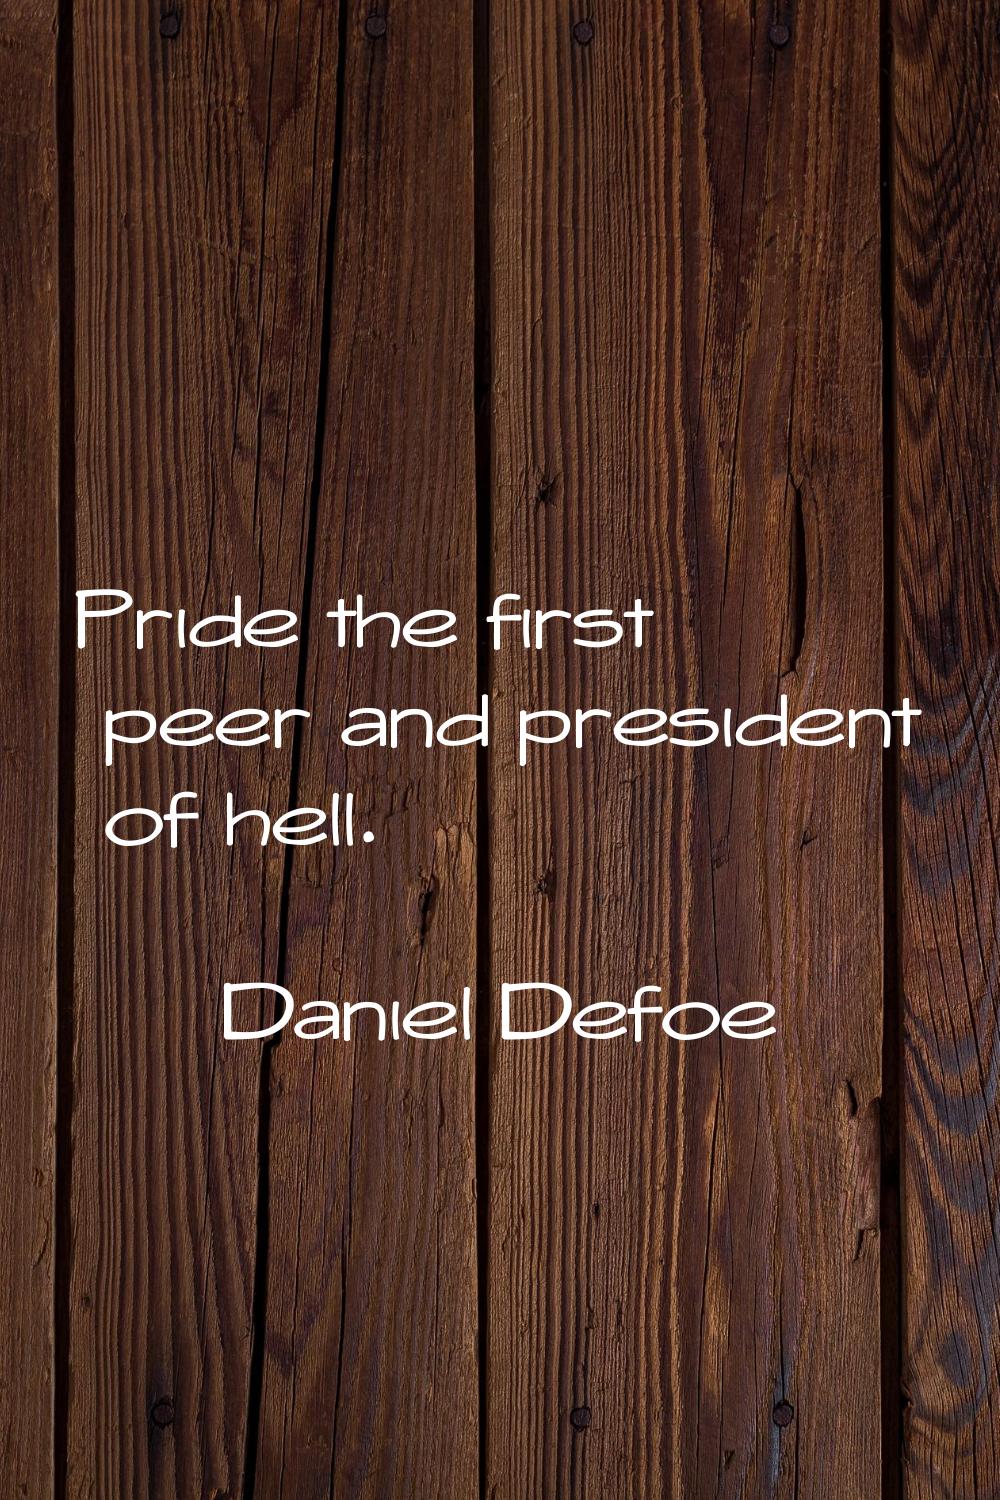 Pride the first peer and president of hell.